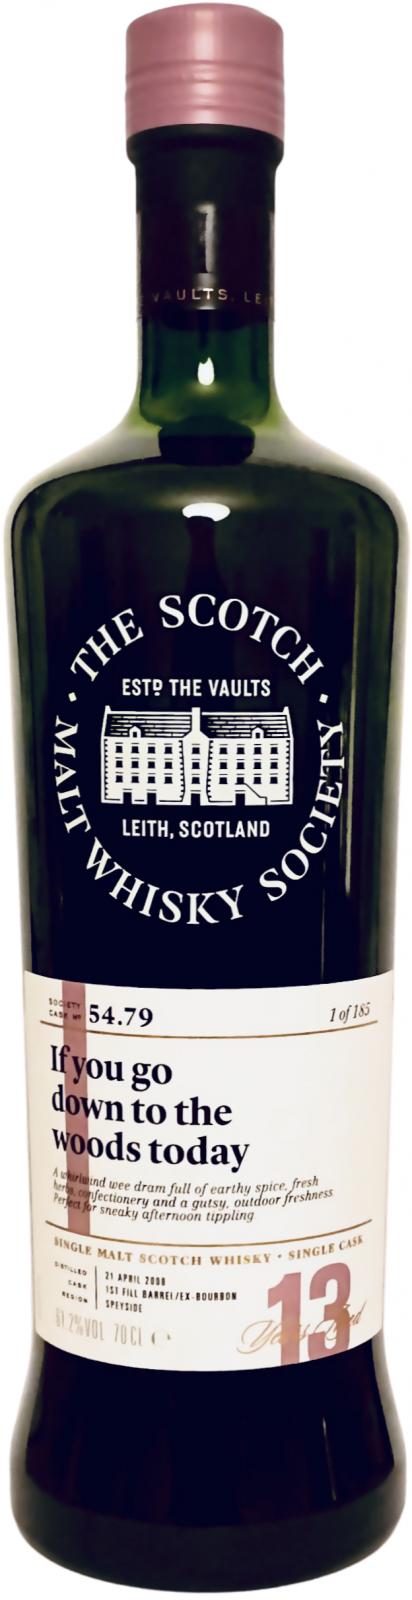 Aberlour 2006 SMWS 54.79 Ifyo u go down to the woods today First Fill Bourbon Barrel 61.2% 700ml